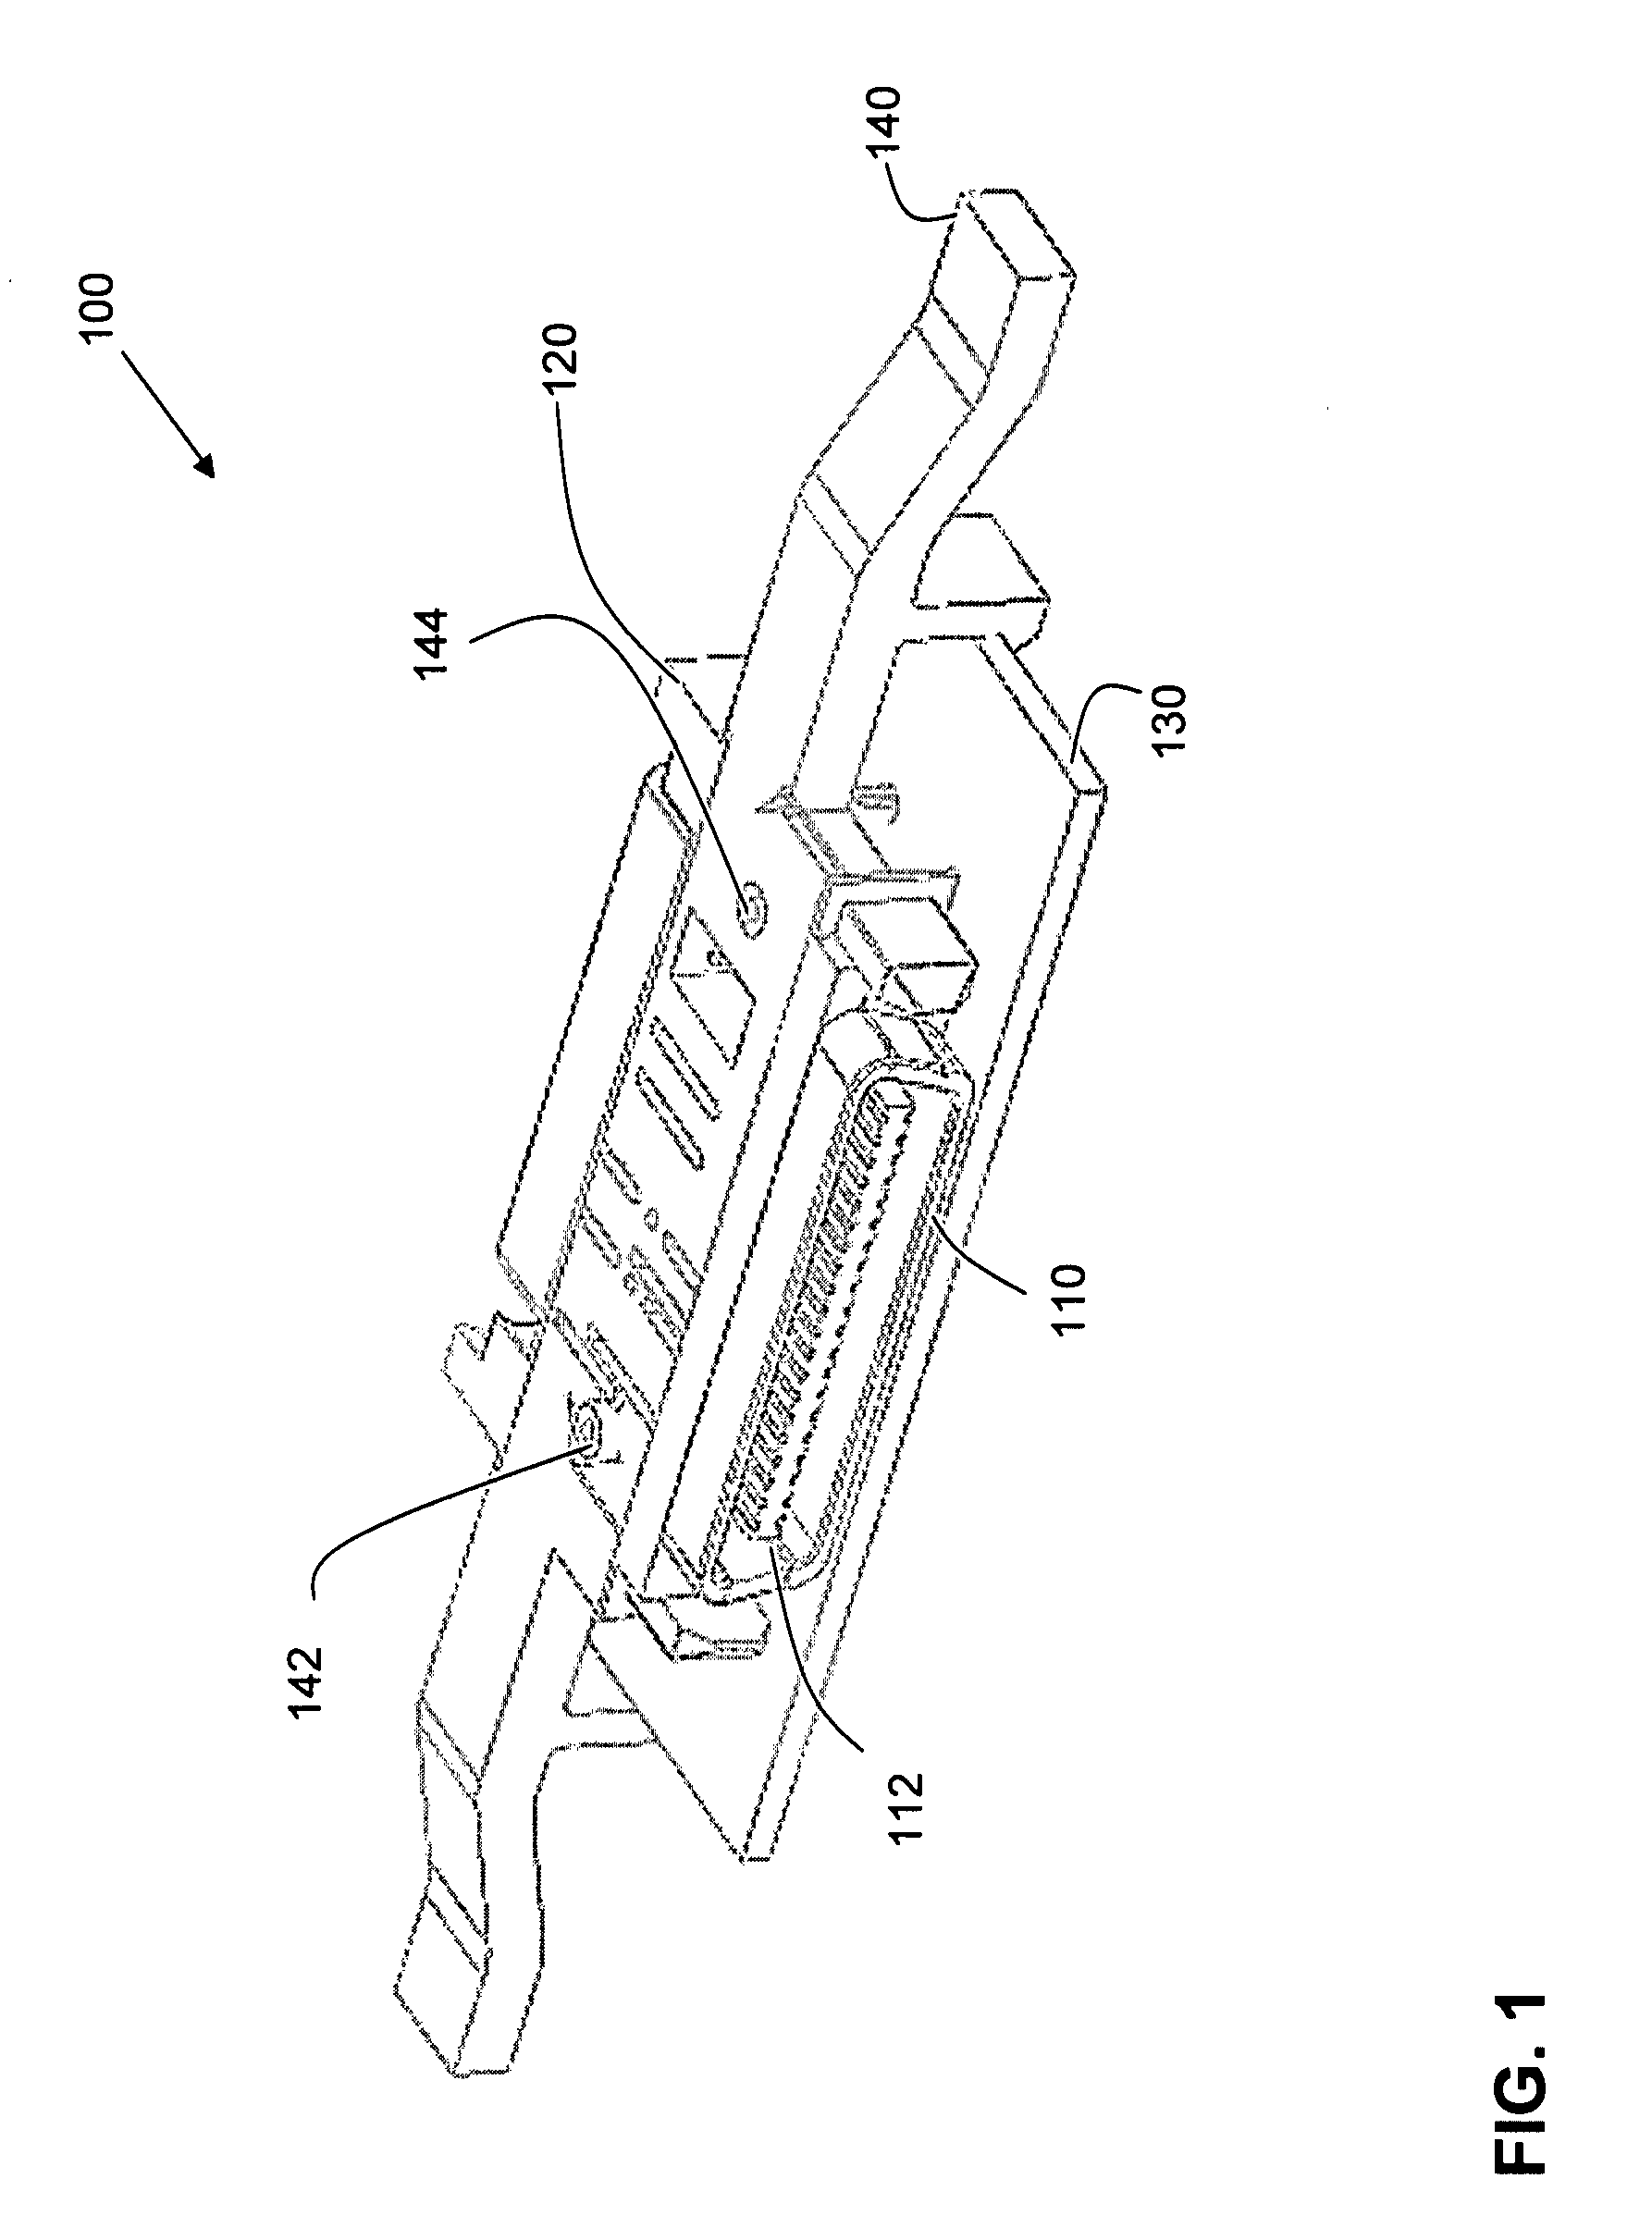 Adapter for interconnecting electrical assemblies